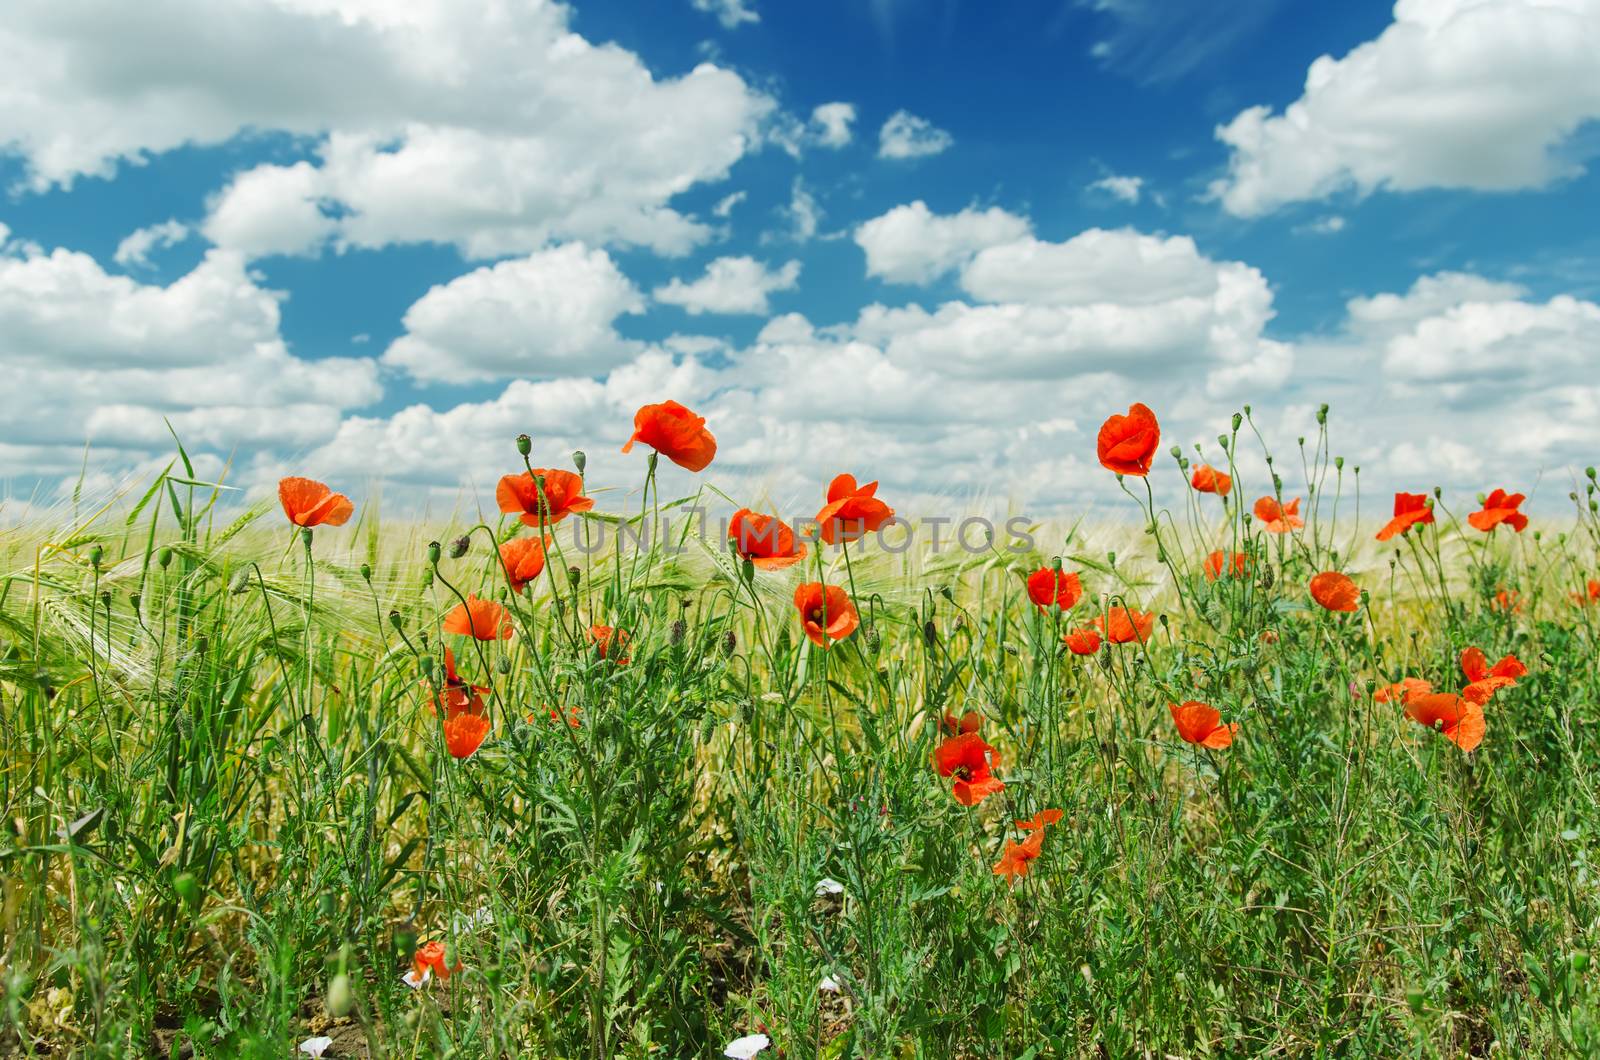 red poppies on green field under cloudy sky by mycola